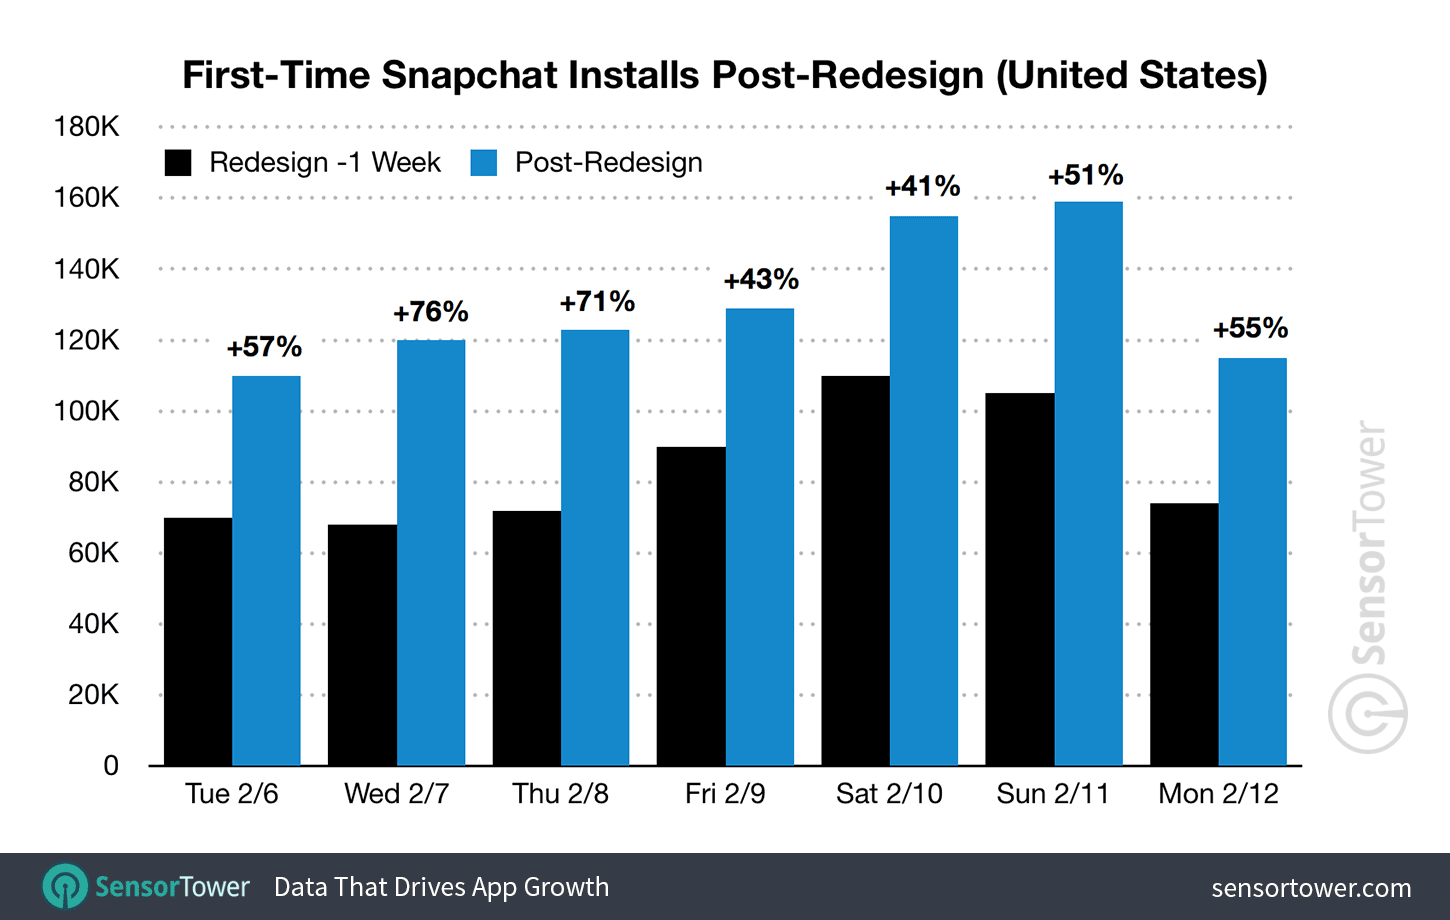 Post-Redesign Snapchat Downloads in the United States